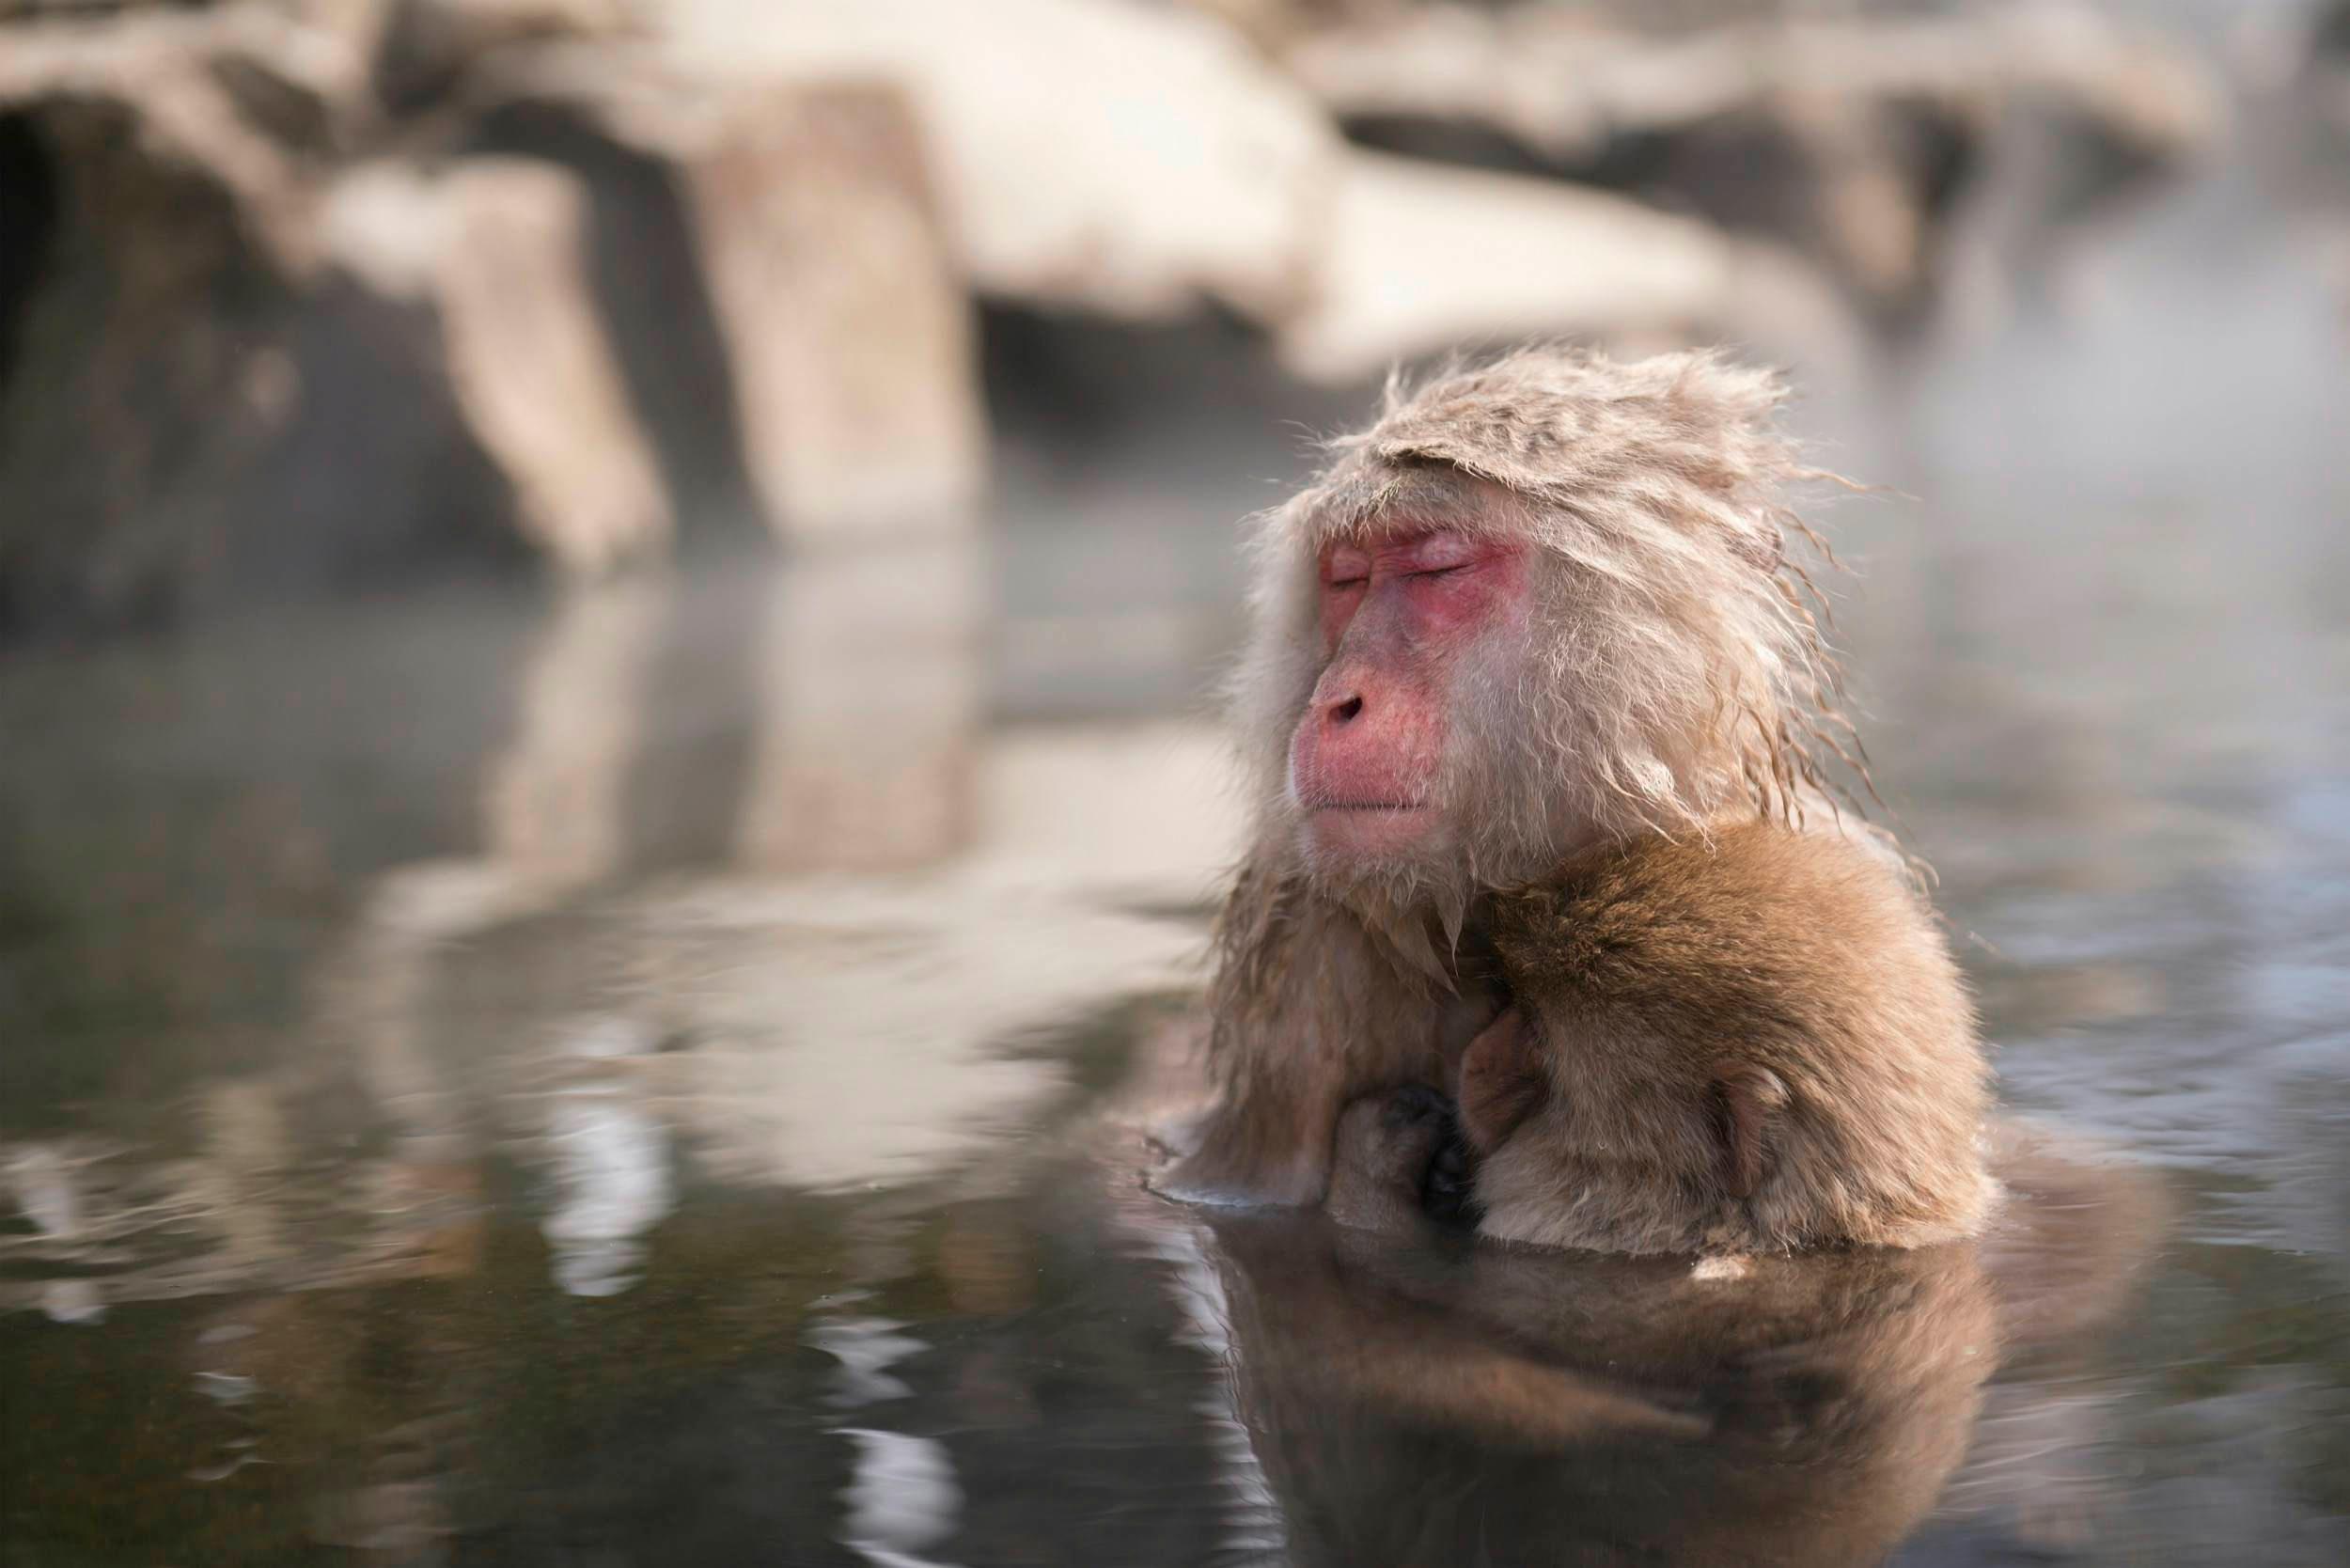 A wild monkey enters a hot spring in Nagano